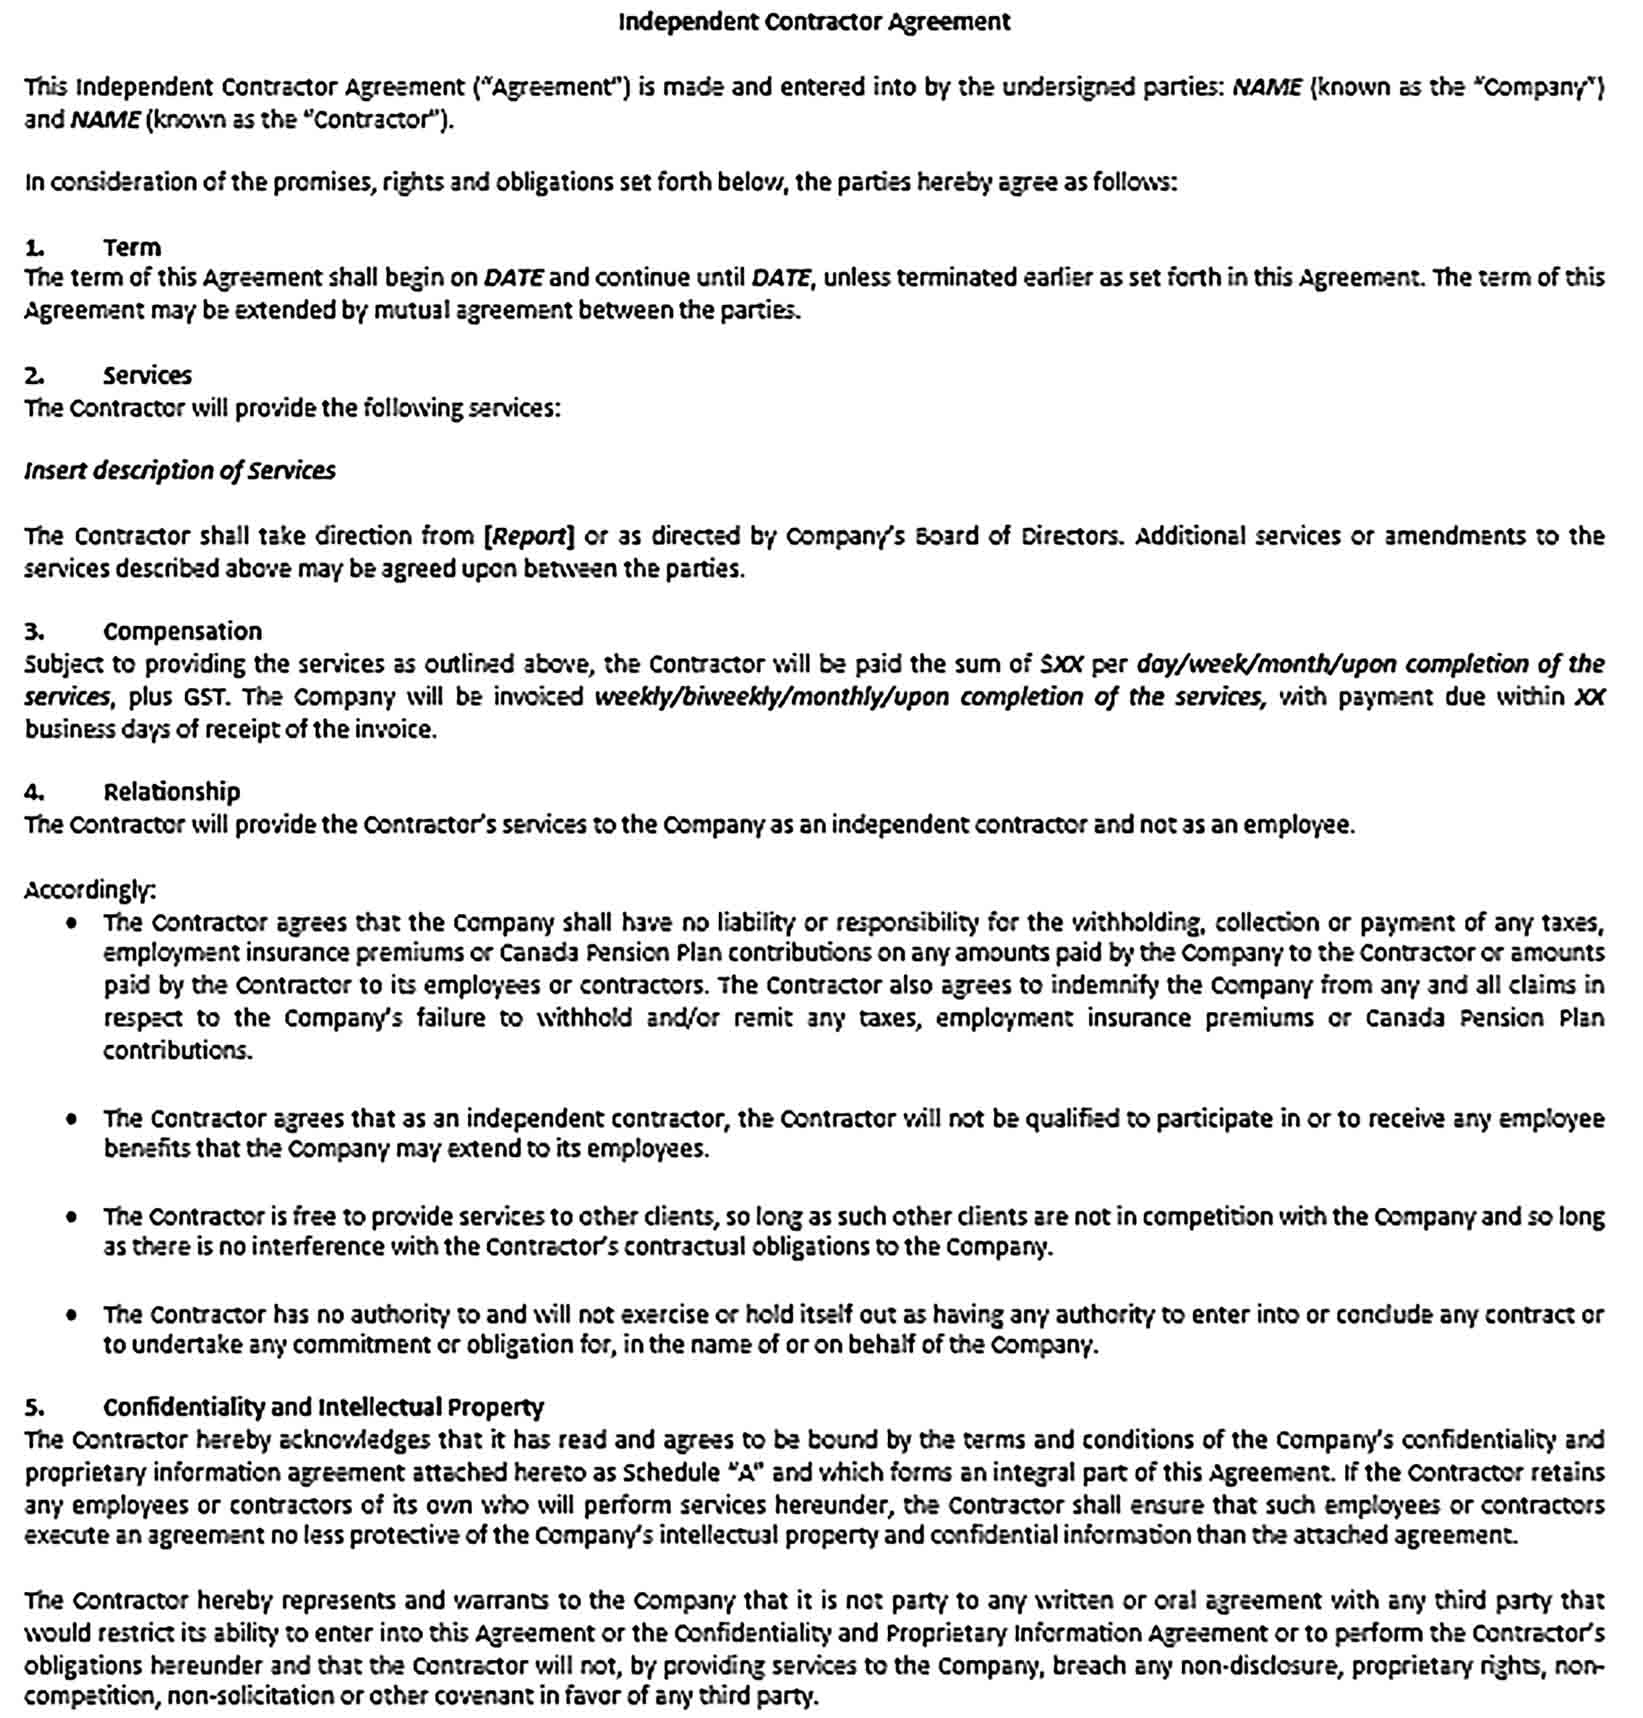 Sample Independent Contractor Agreement 002